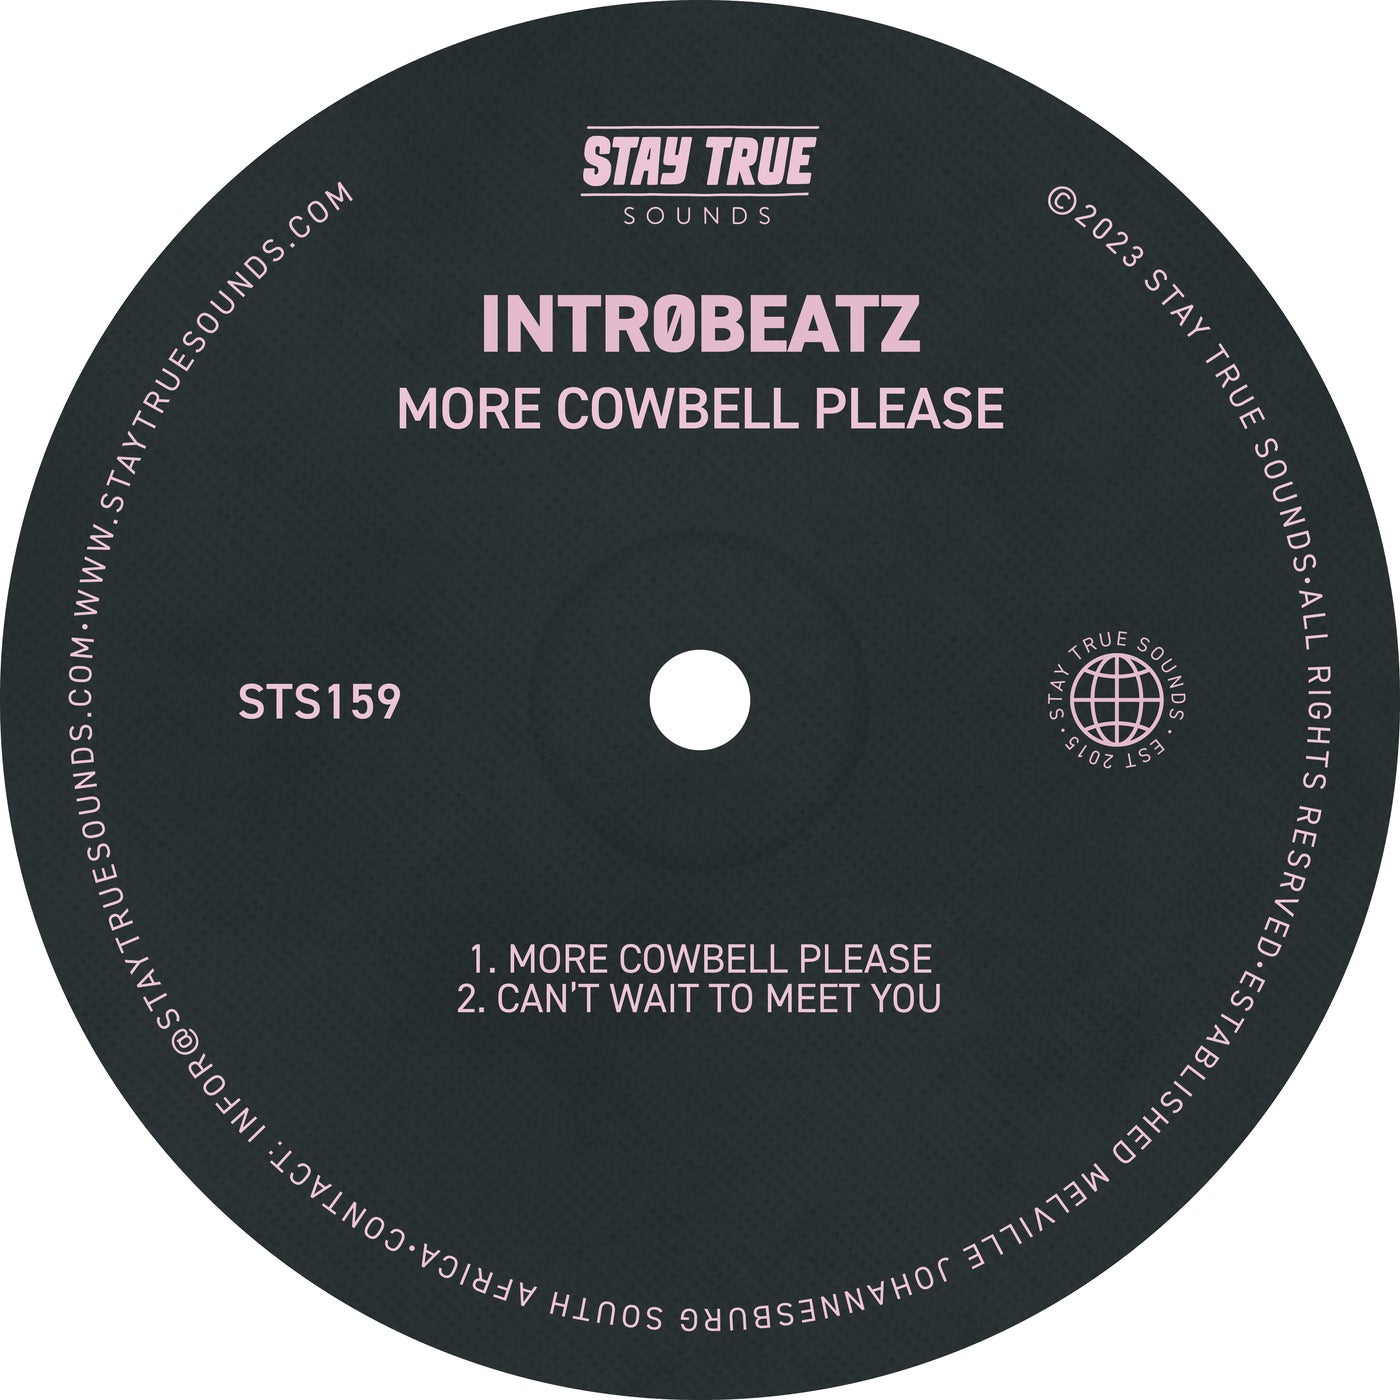 Intr0beatz - More Cowbell Please [Stay True Sounds]